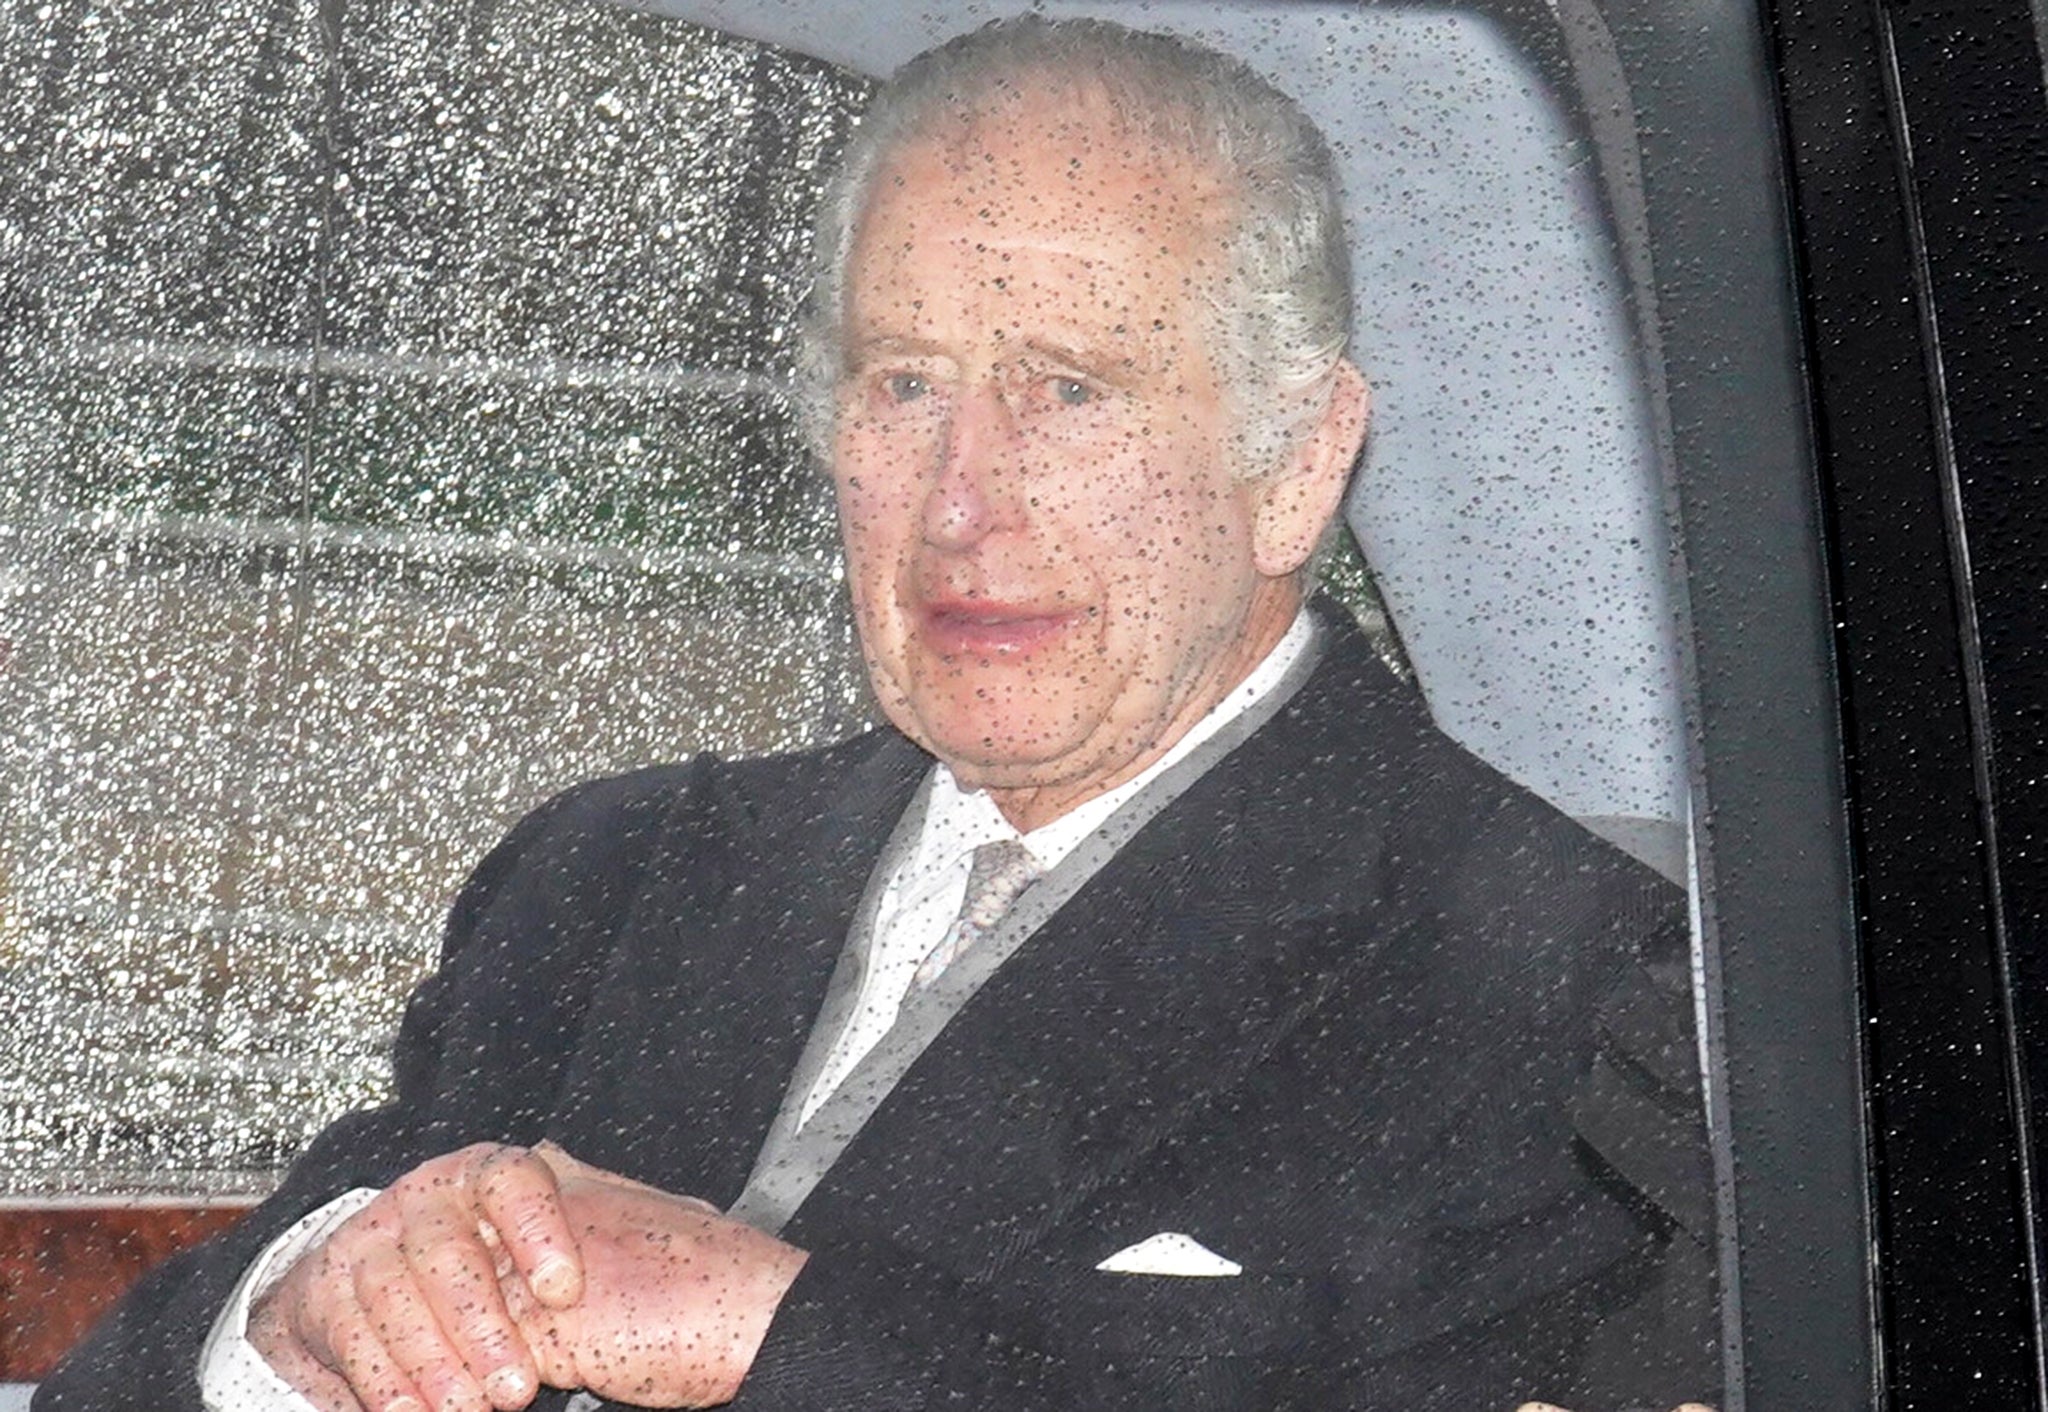 King Charles III arrives back at Clarence House in London after spending a week at Sandringham in Norfolk, following the announcement of his cancer diagnosis